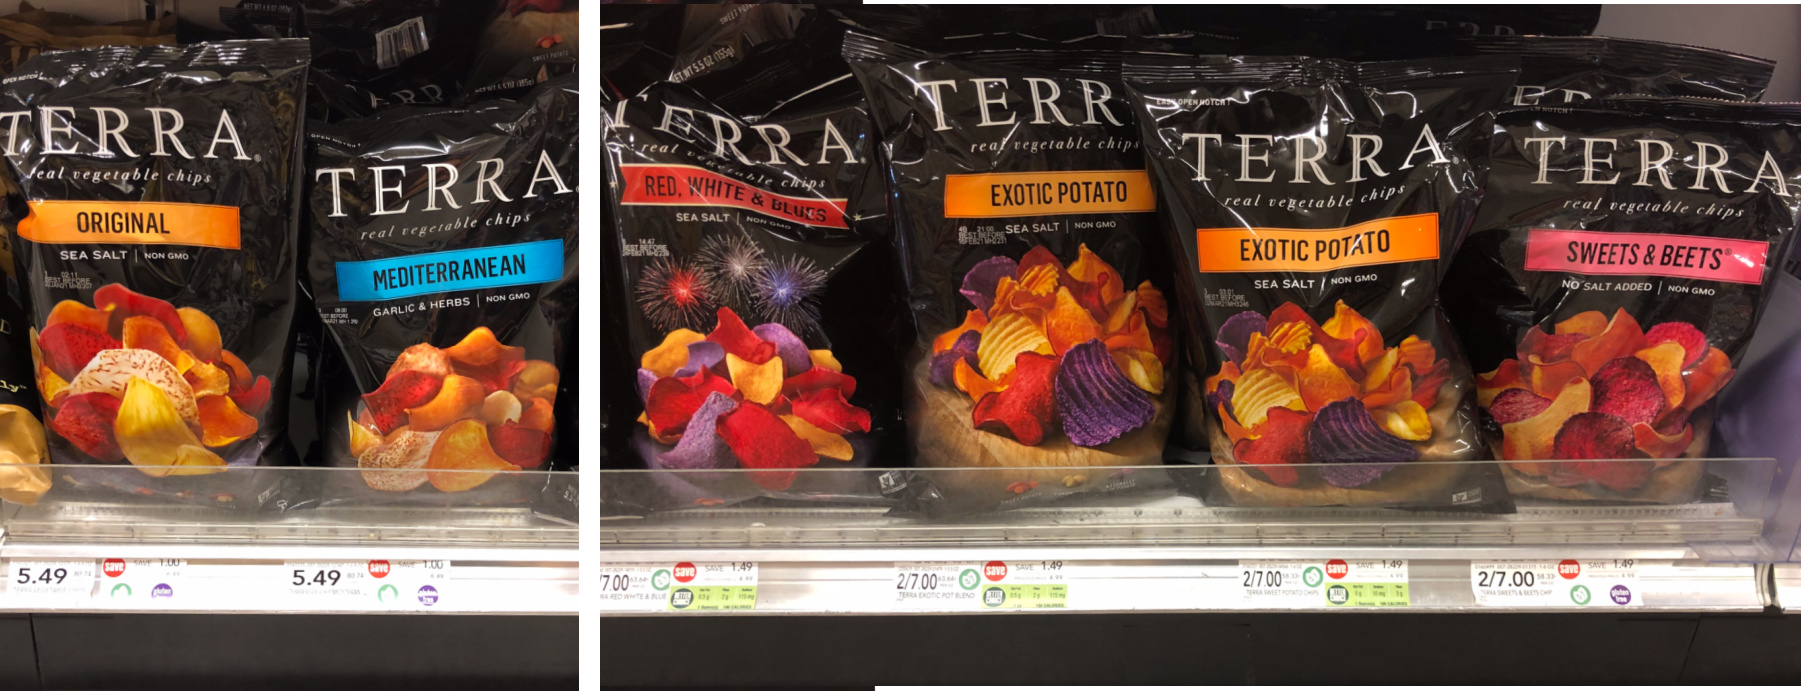 Pick Up A Great Deal On Your Favorite Terra Chips® - Save At Publix on I Heart Publix